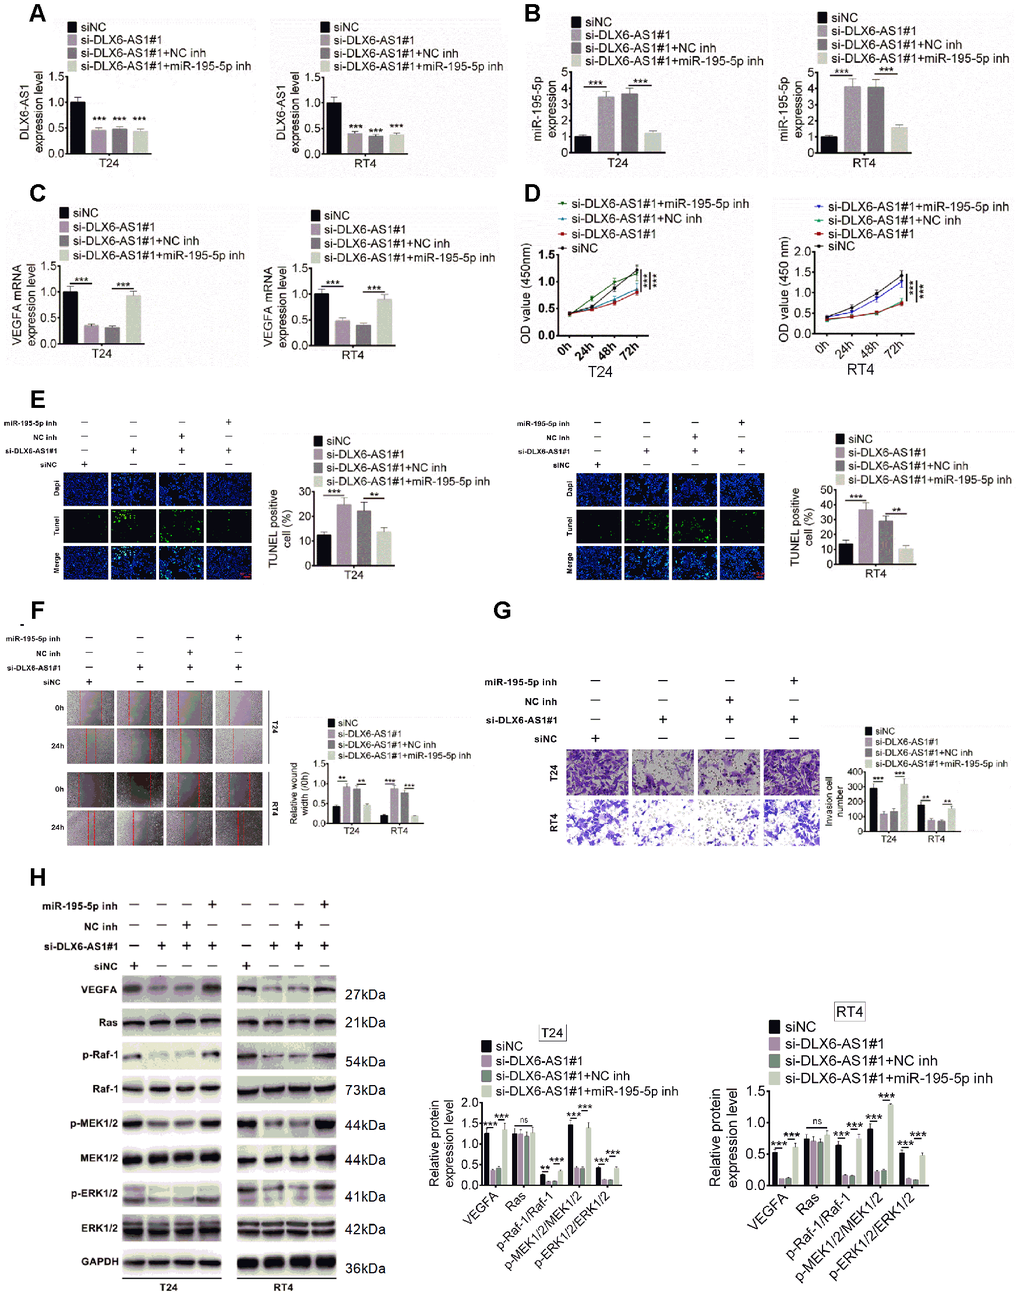 Effect of DLX6-AS1 and miR-195-5p on proliferation, migration, and invasion of BC cells and phosphorylation of VEGFA, Ras, MEK1/2, ERK1/2. (A–C) BC cells were transfected with siNC, siNC + si-DLX6-AS1, si-DLX6-AS1 + NC inhibitor, or si-DLX6-AS1 + miR-195-5p inhibitor. DLX6-AS1 expression (A), miR-miR-195-5p expression (B), and VEGFA mRNA expression (C) were examined by qRT-PCR assay. (D) Cell proliferation of BC cells was identified by CCK8 kit. (E) Cell apoptosis was examined by TUNEL assay. (F) Cell migration was detected by wound healing assay. (G) Cell migration was identified by transwell assay. (H) The effect of sh-DLX6-AS1 and miR-195-5p inhibitor on protein expression and phosphorylation levels of VEGFA and Ras/ERK signaling molecules was evaluated by western blot. Data were expressed as the mean ± SD, n = 3. *P P P 